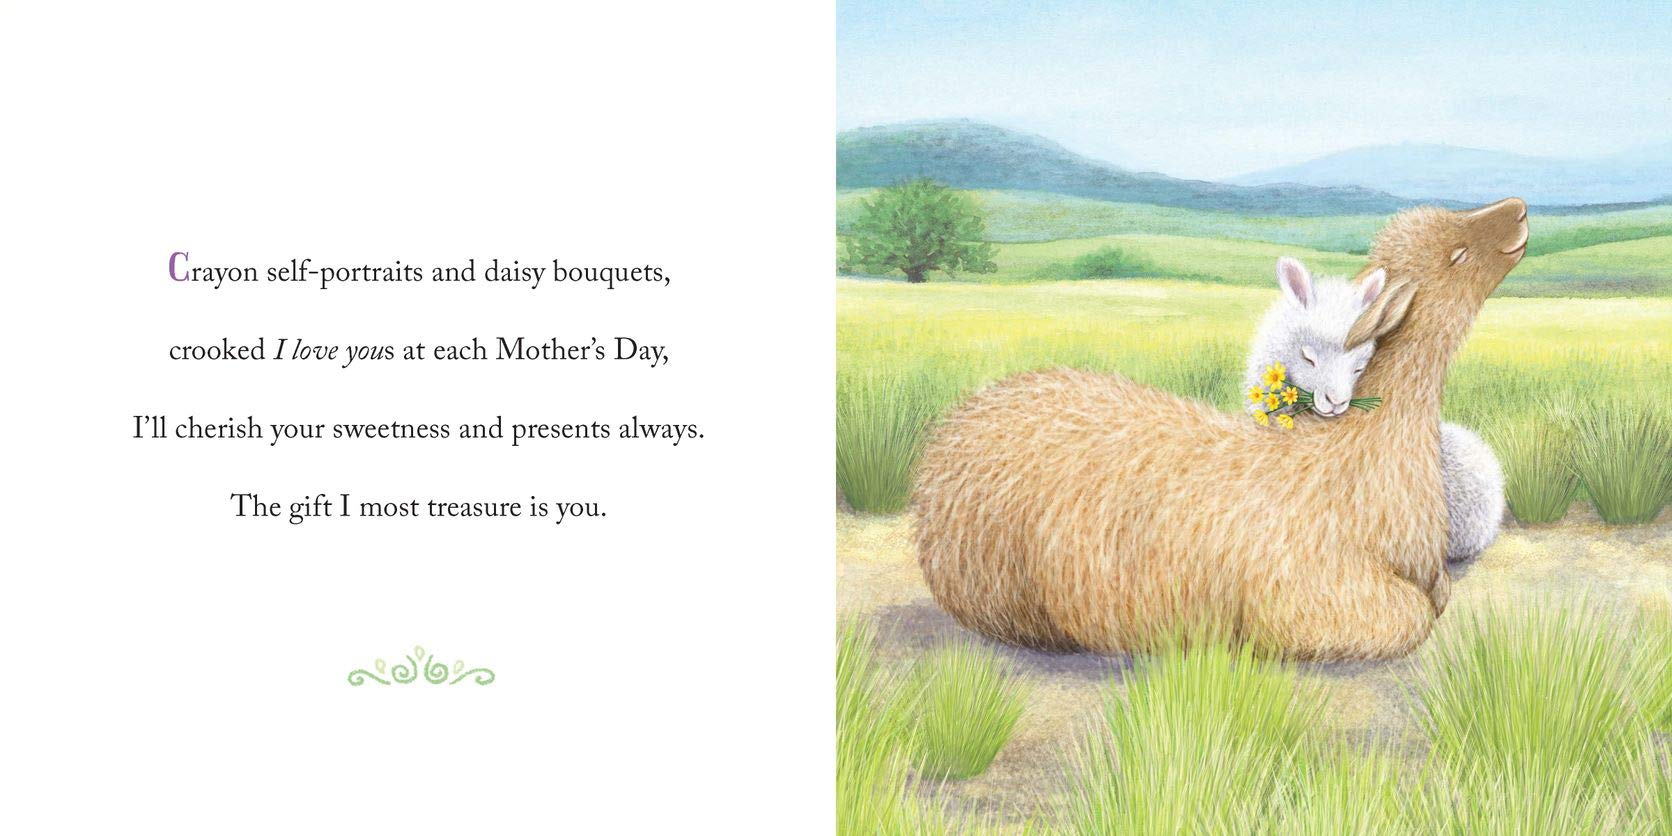 Why a Son Needs a Mom: Celebrate Your Special Mother and Son Bond with this Sweet Picture Book! (Always in My Heart)